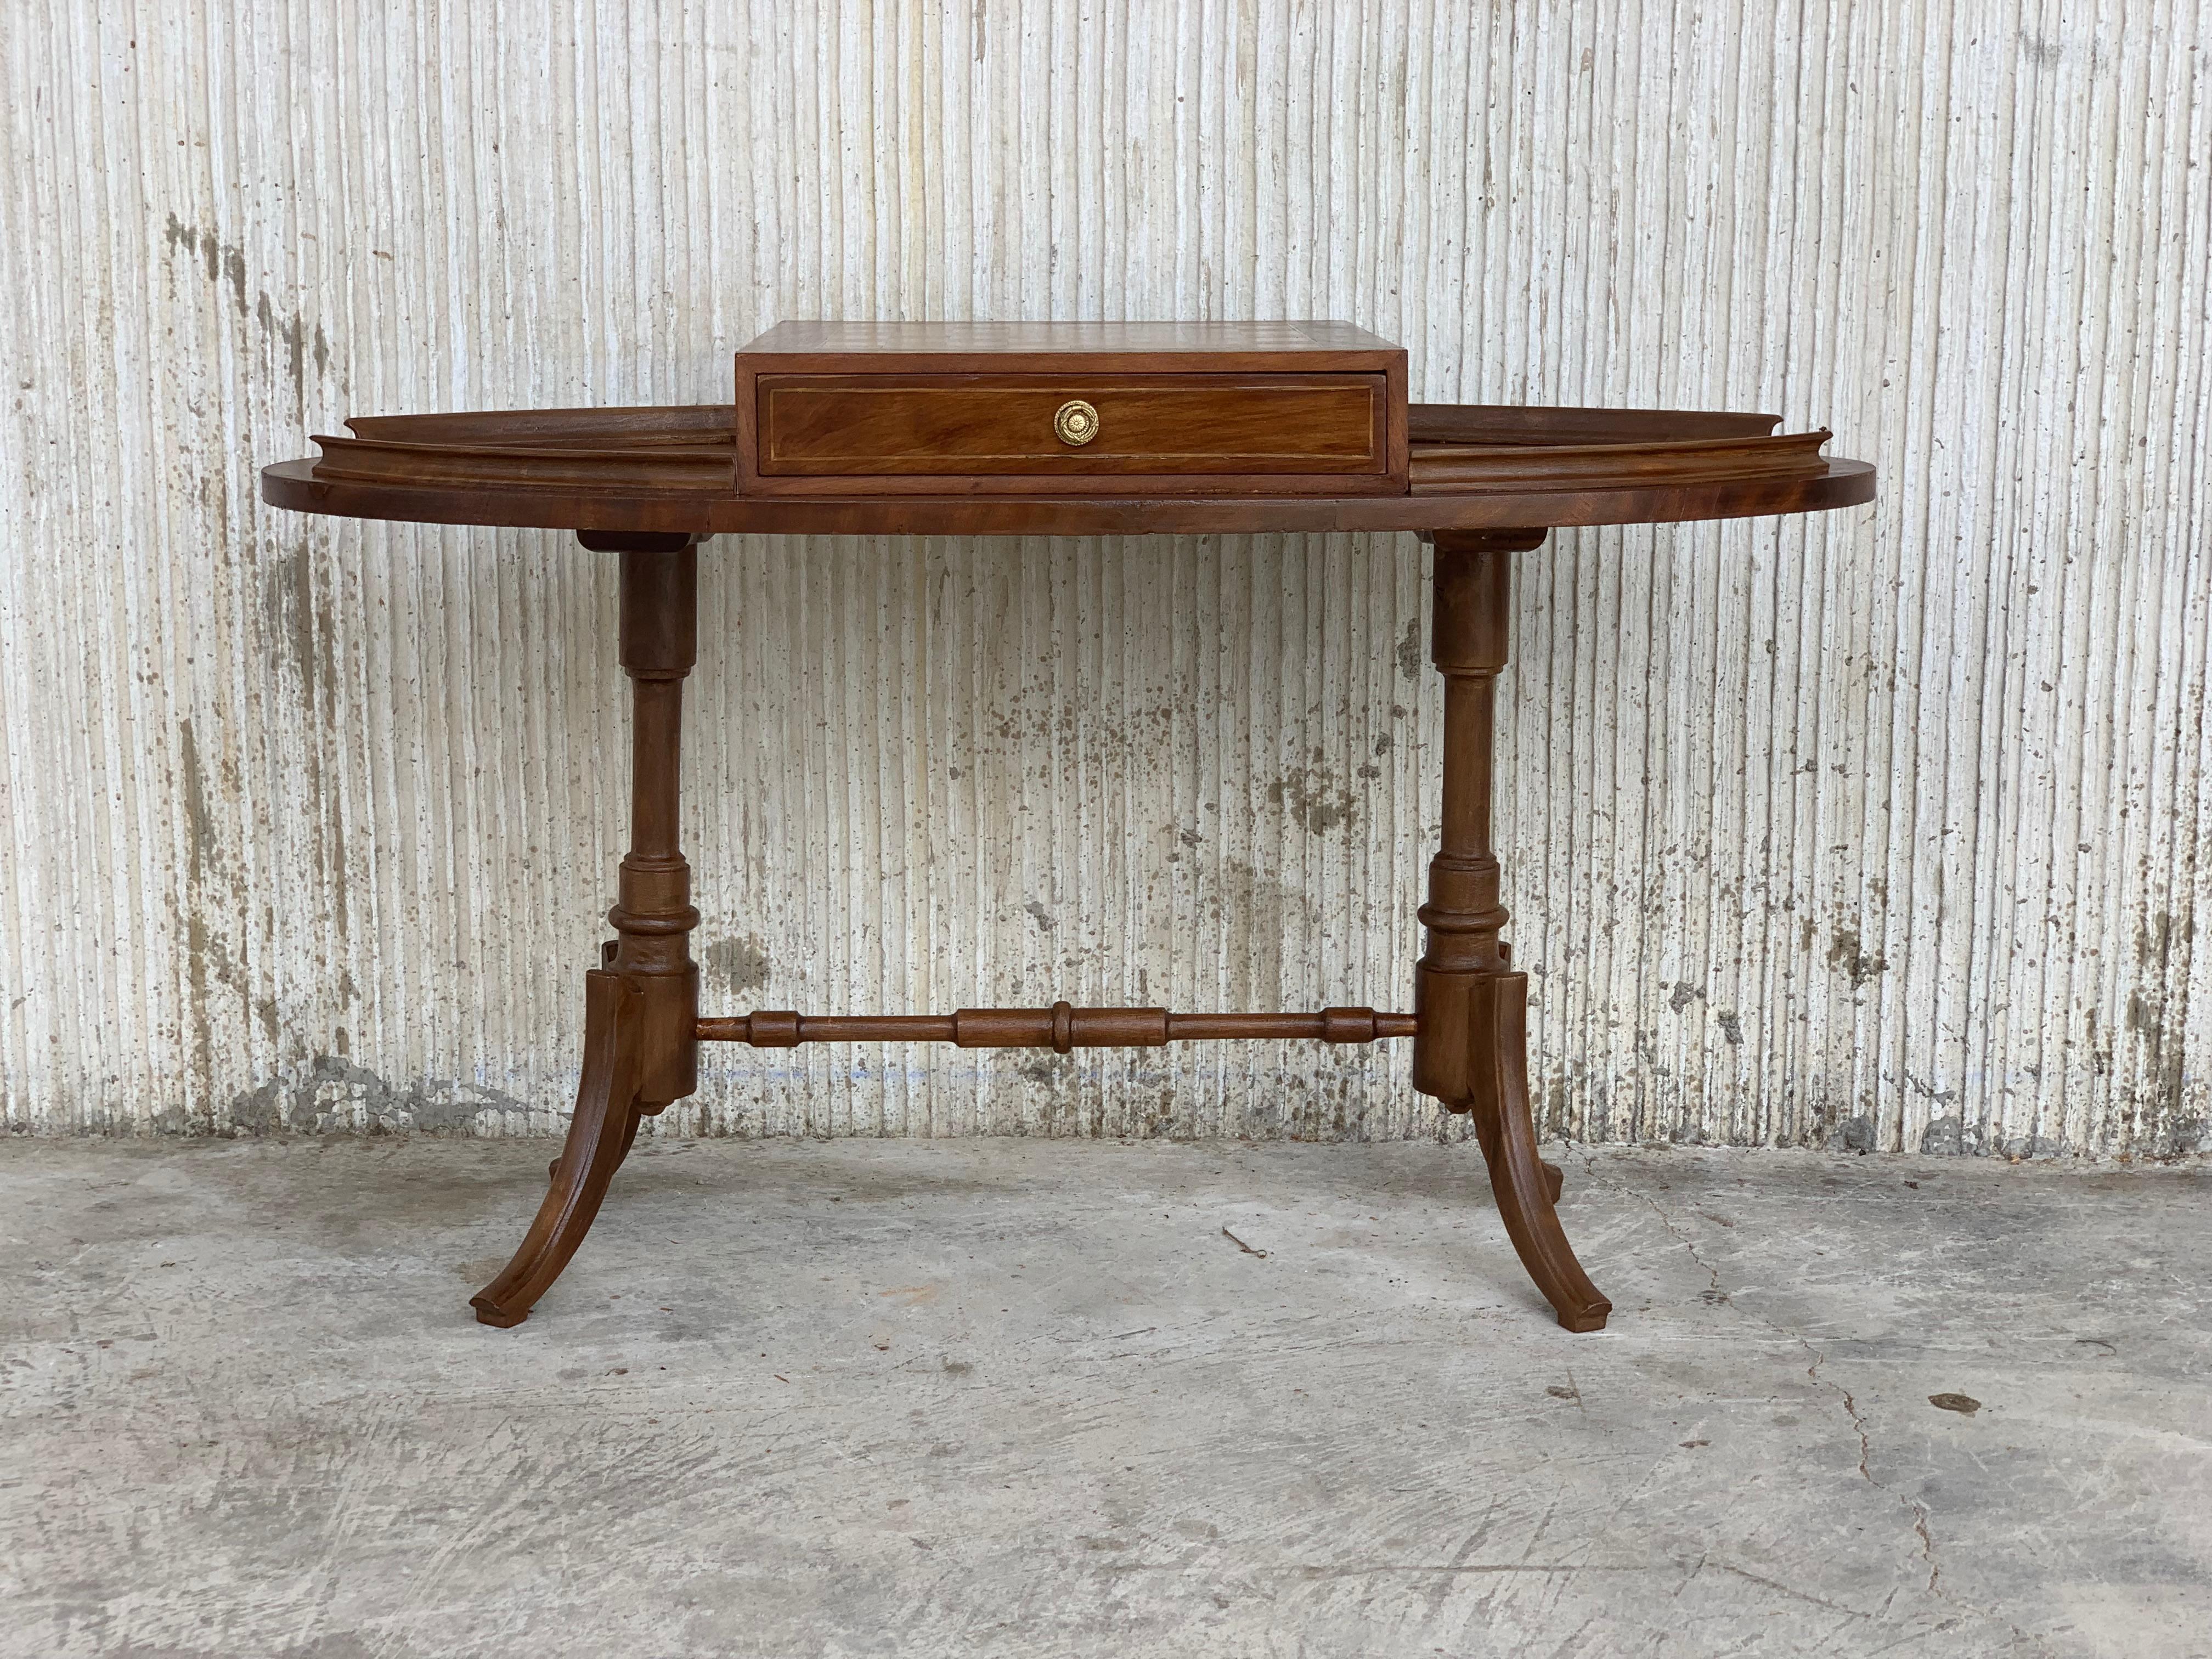 20th Regency style oval walnut chess game table with two drawers

Measures: Total height 23.5